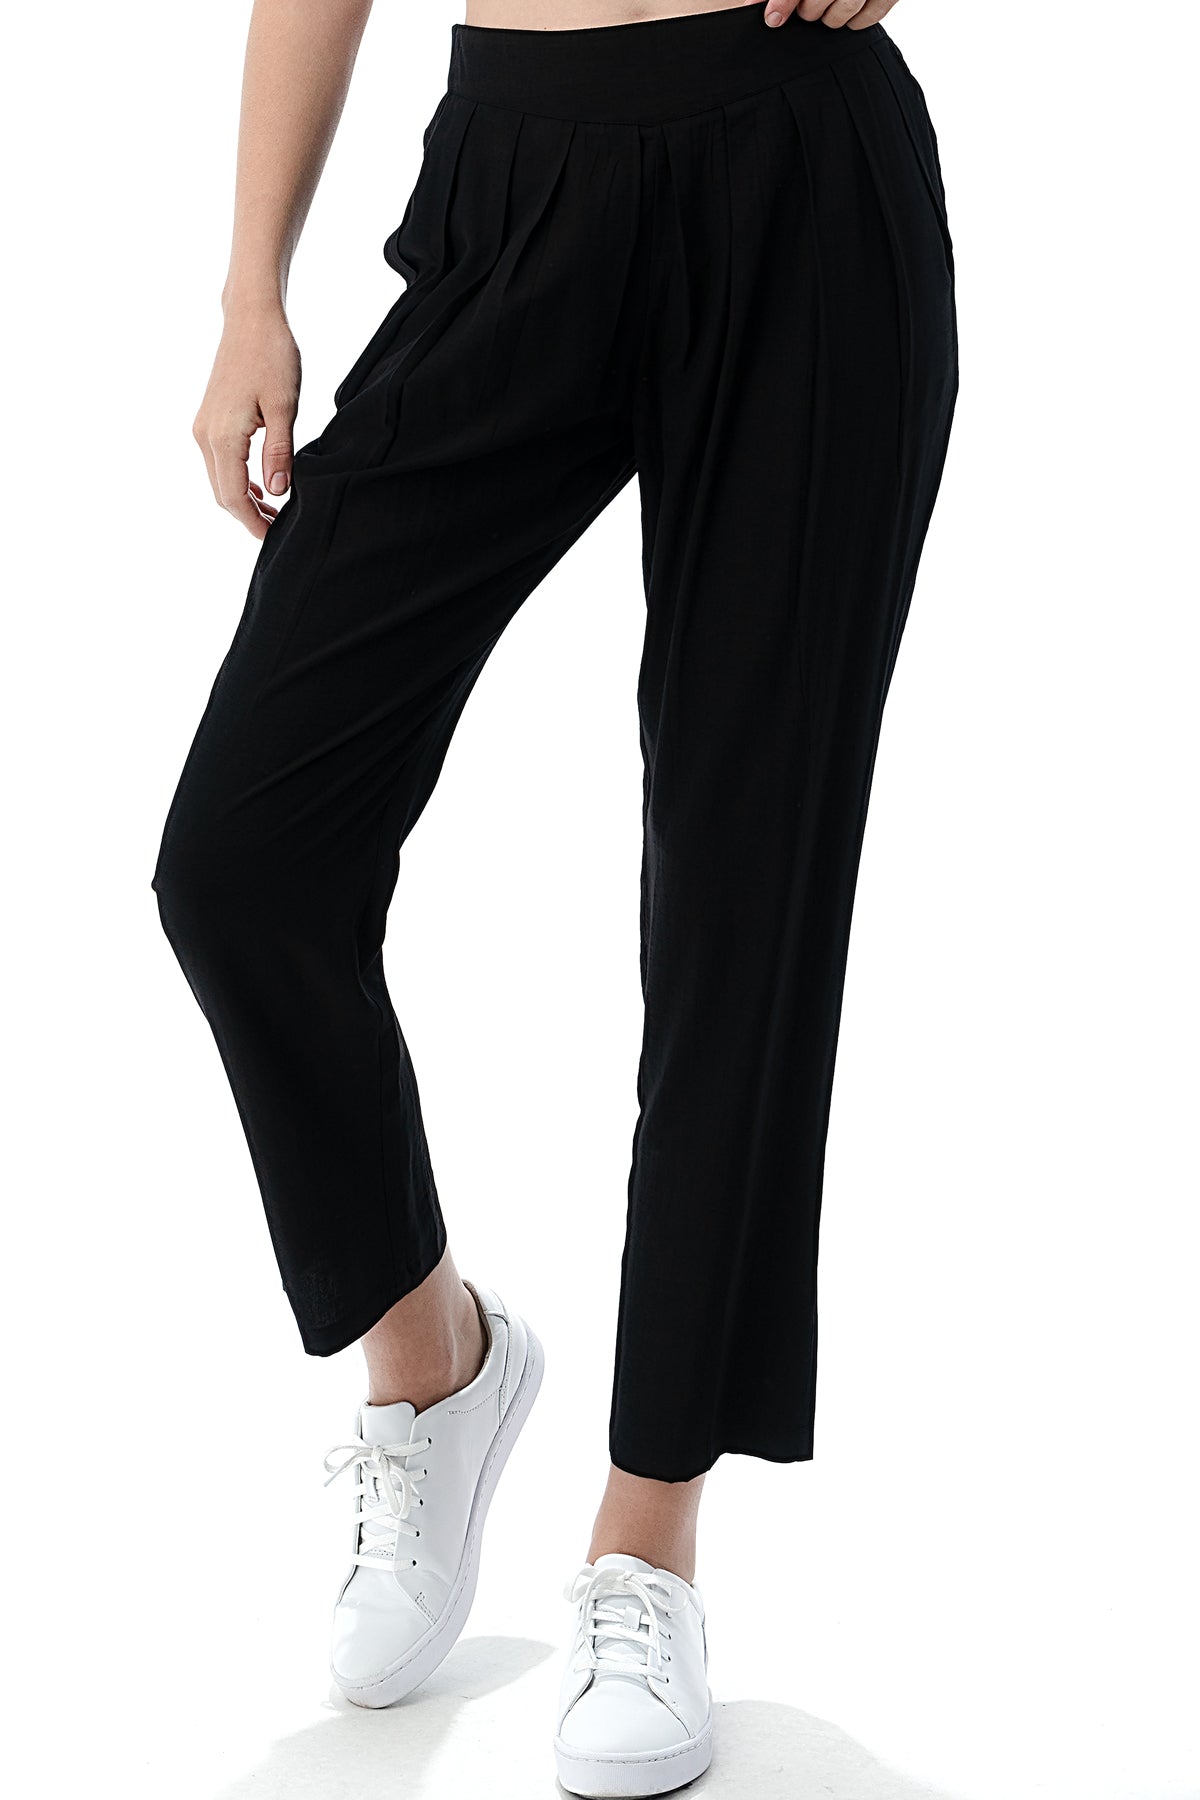 plain ladies Knitted Pants 507TK, Waist Size: 30.0 at Rs 230 in Surat